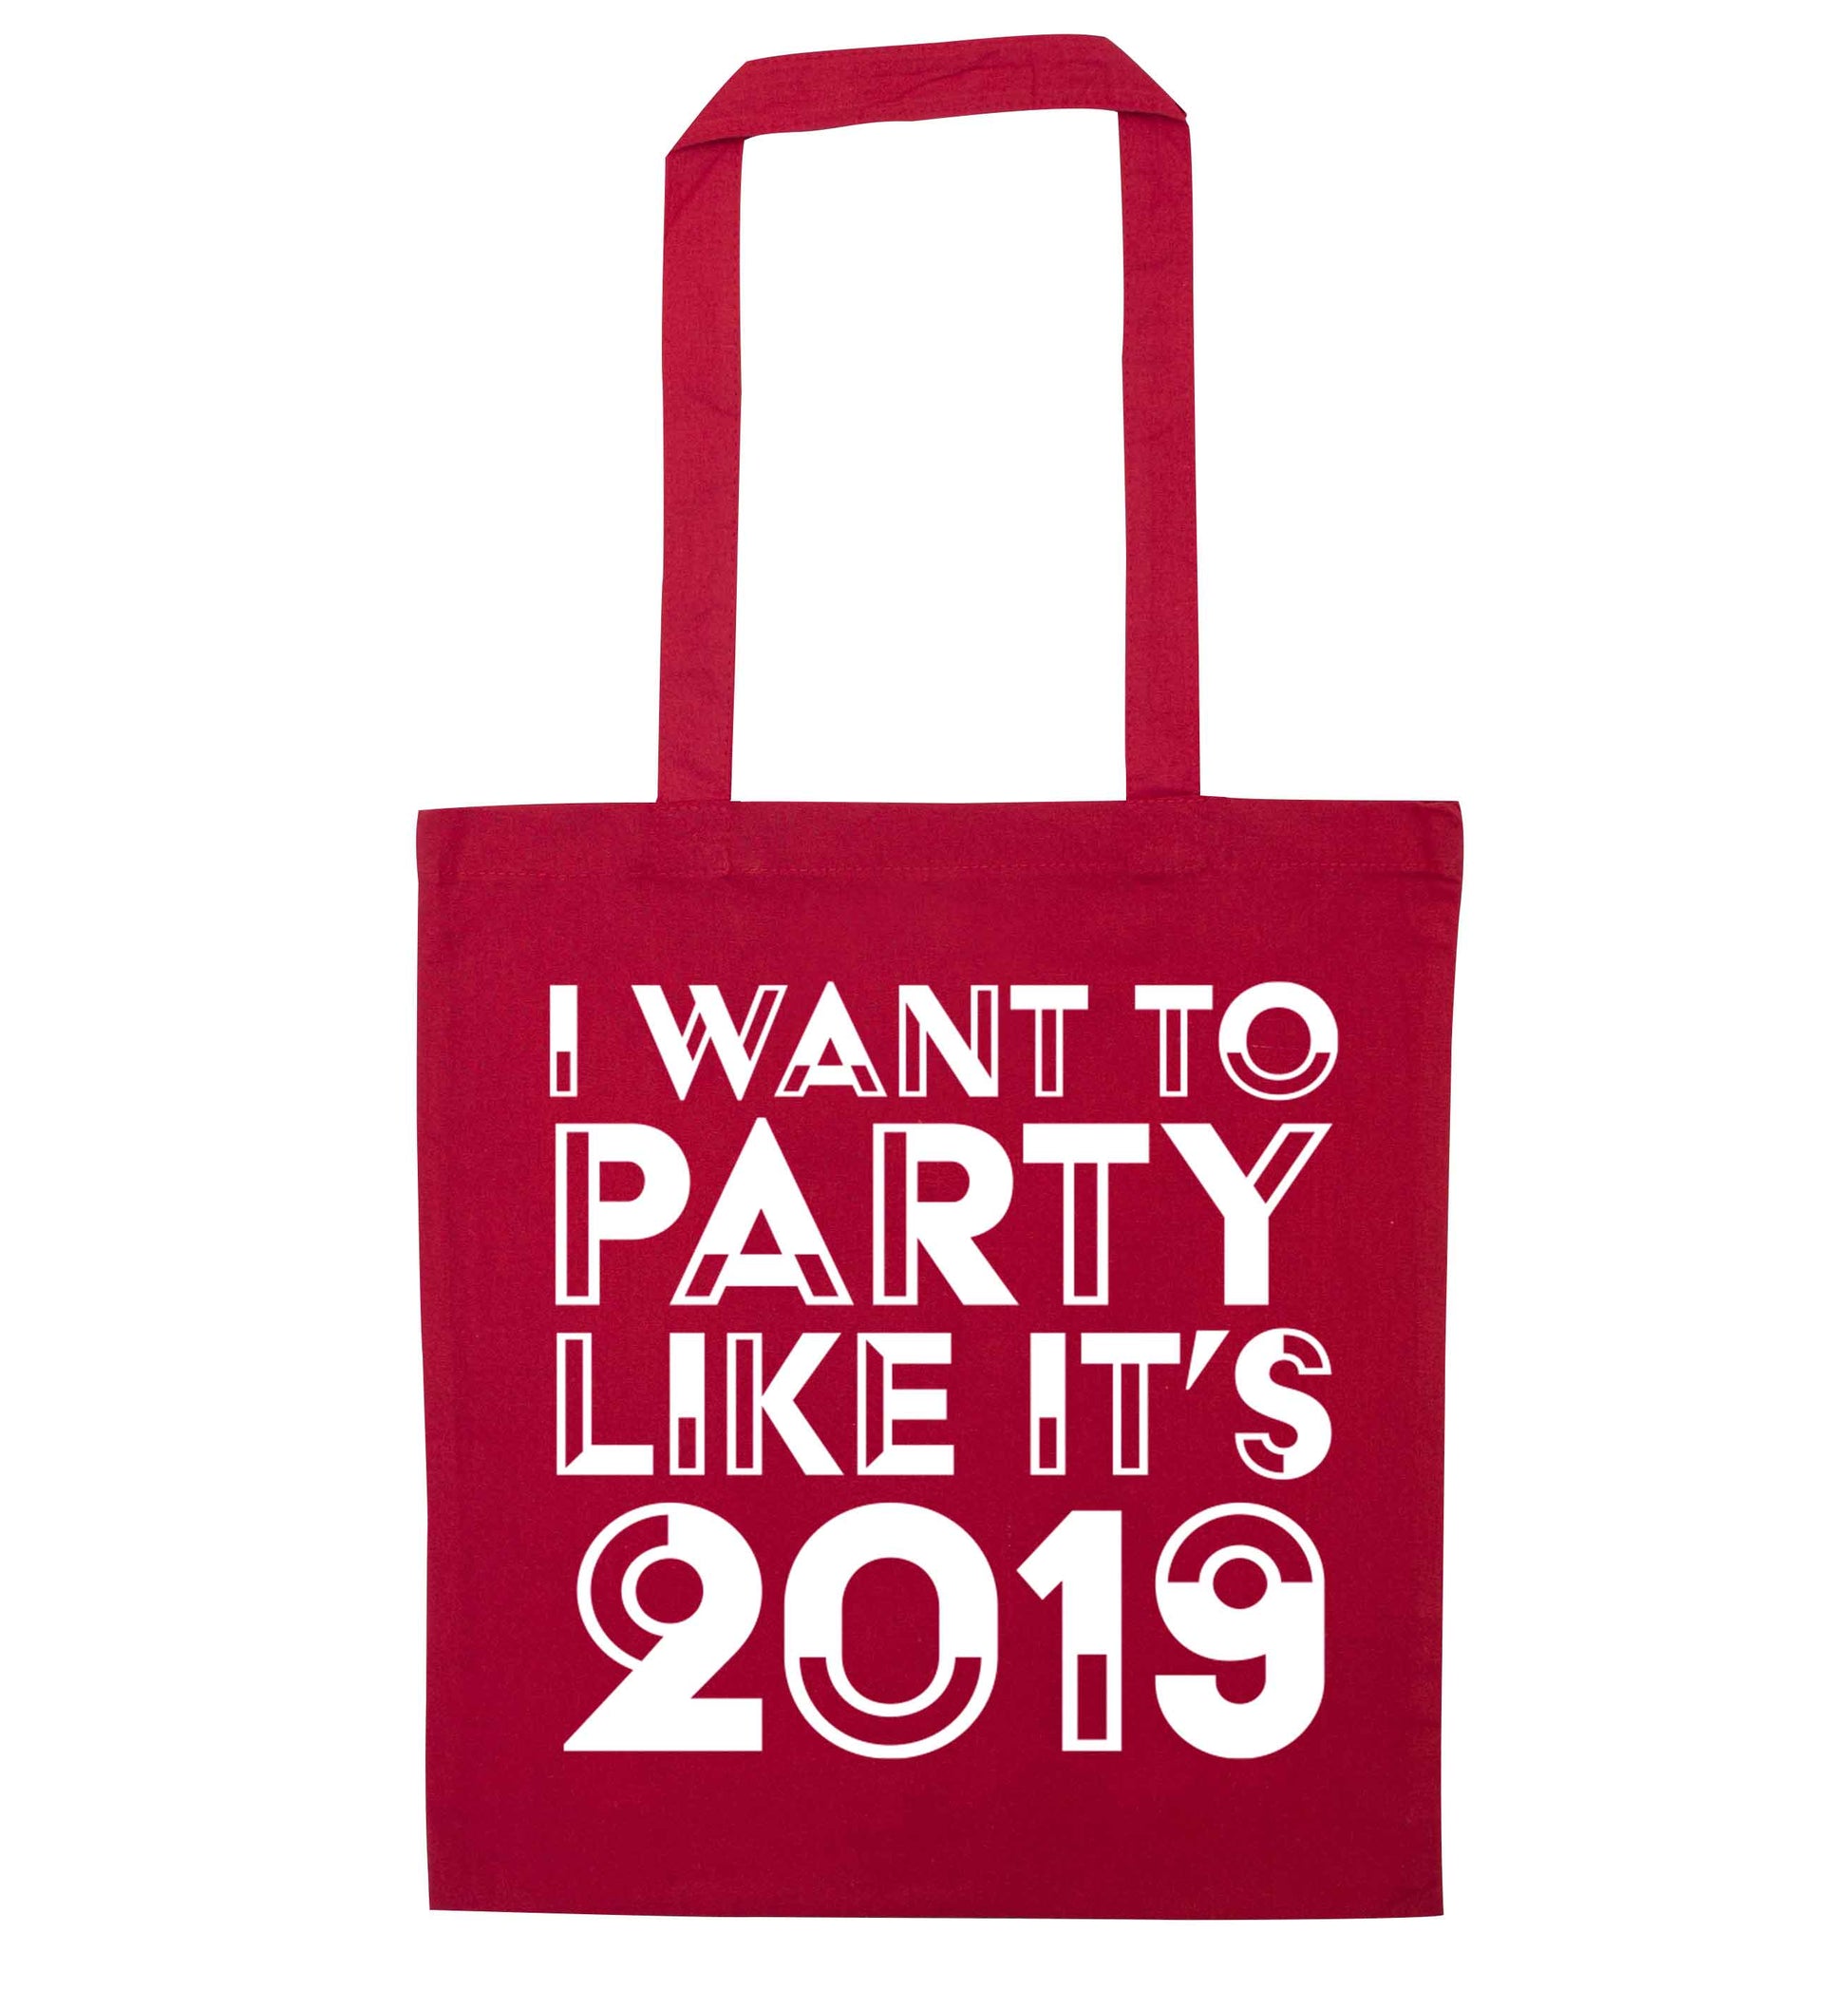 I want to party like it's 2019 red tote bag